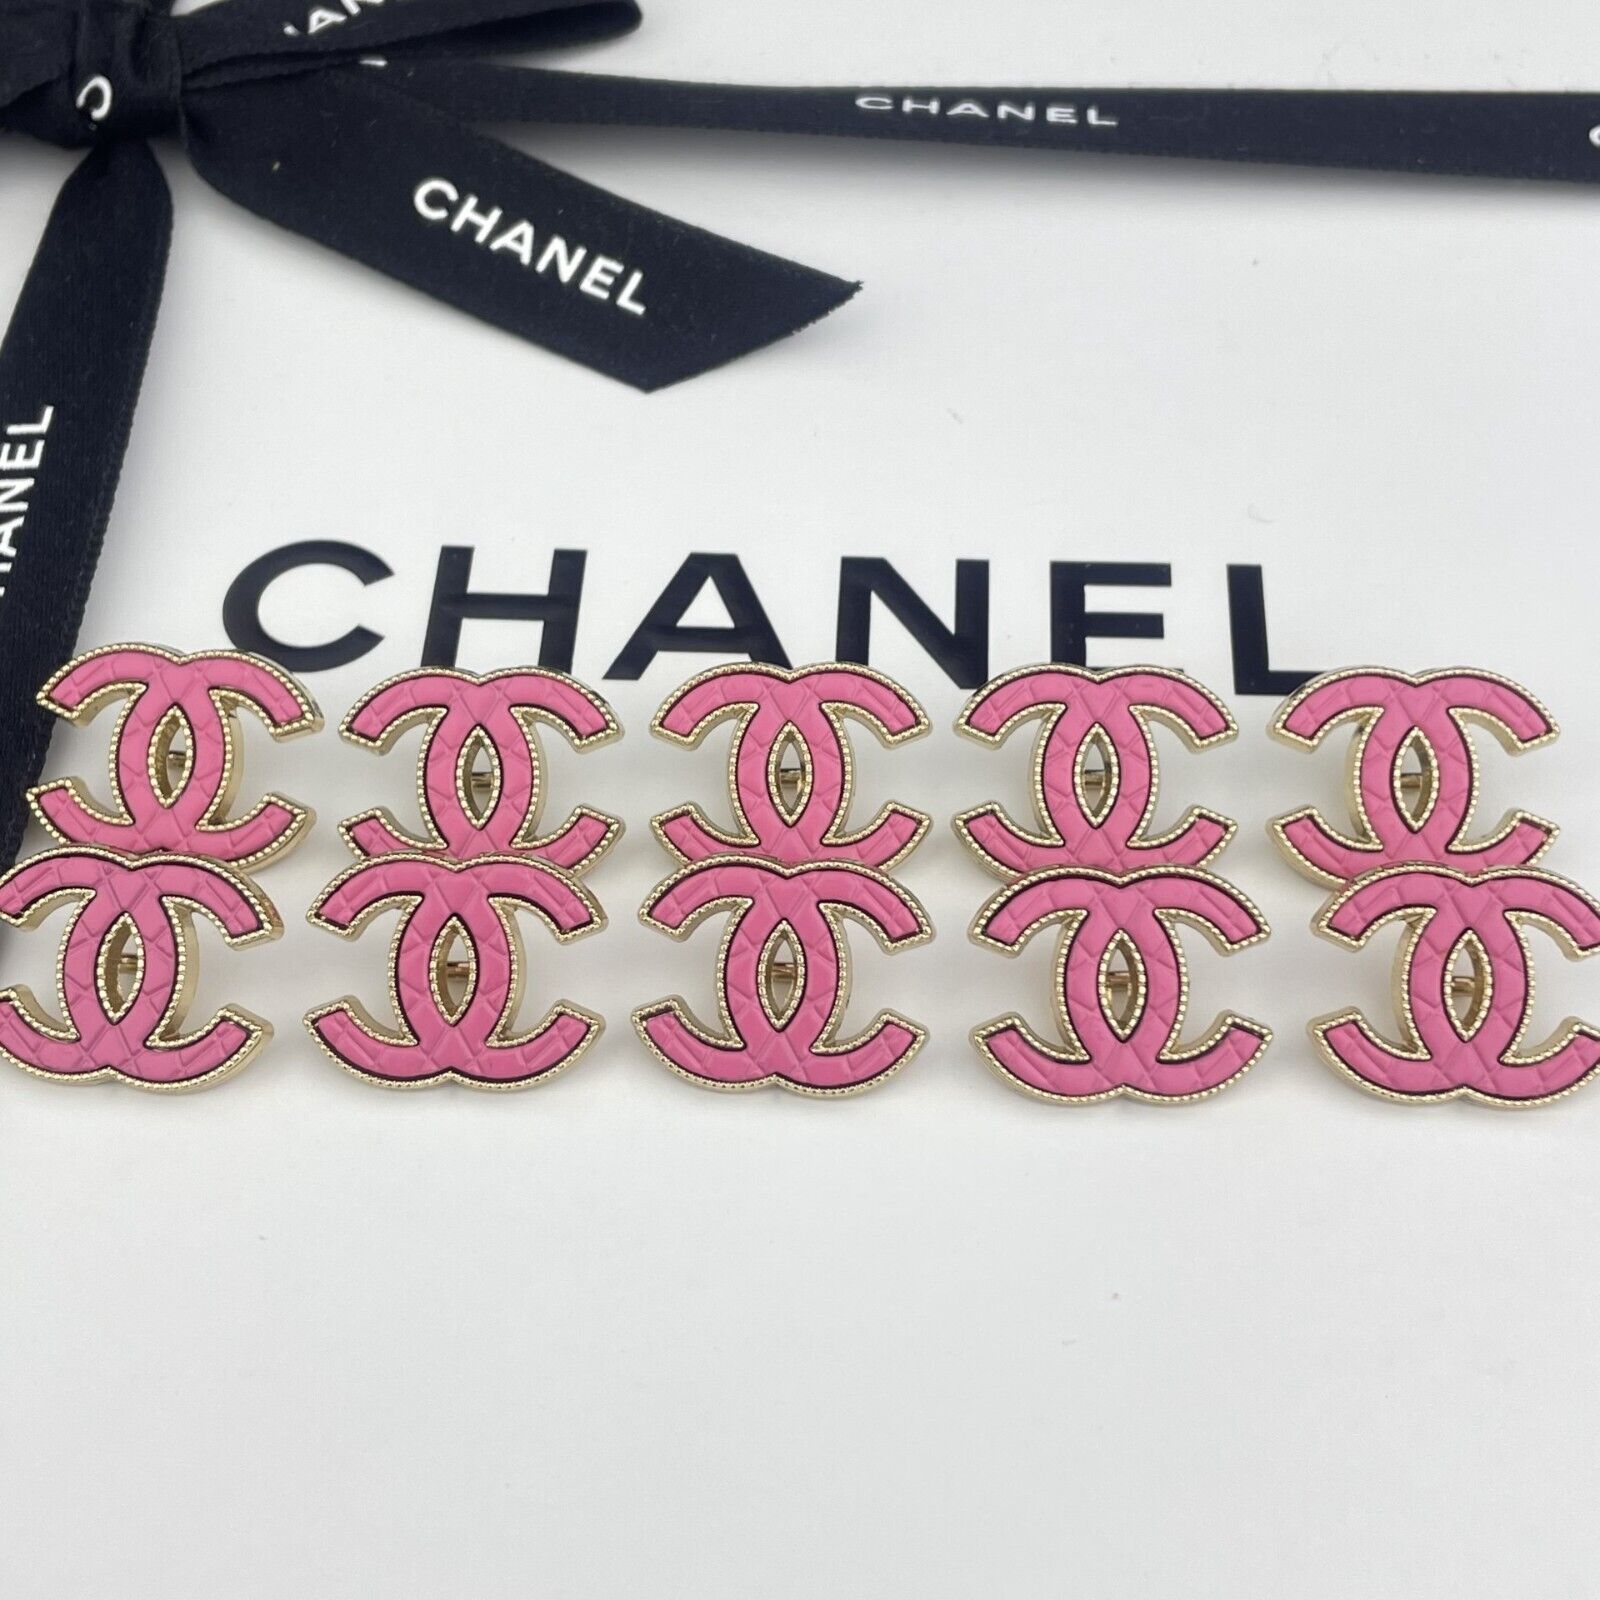 10 CHANEL BUTTONS PINK GOLD CC LOGO METAL 20MM VINTAGE